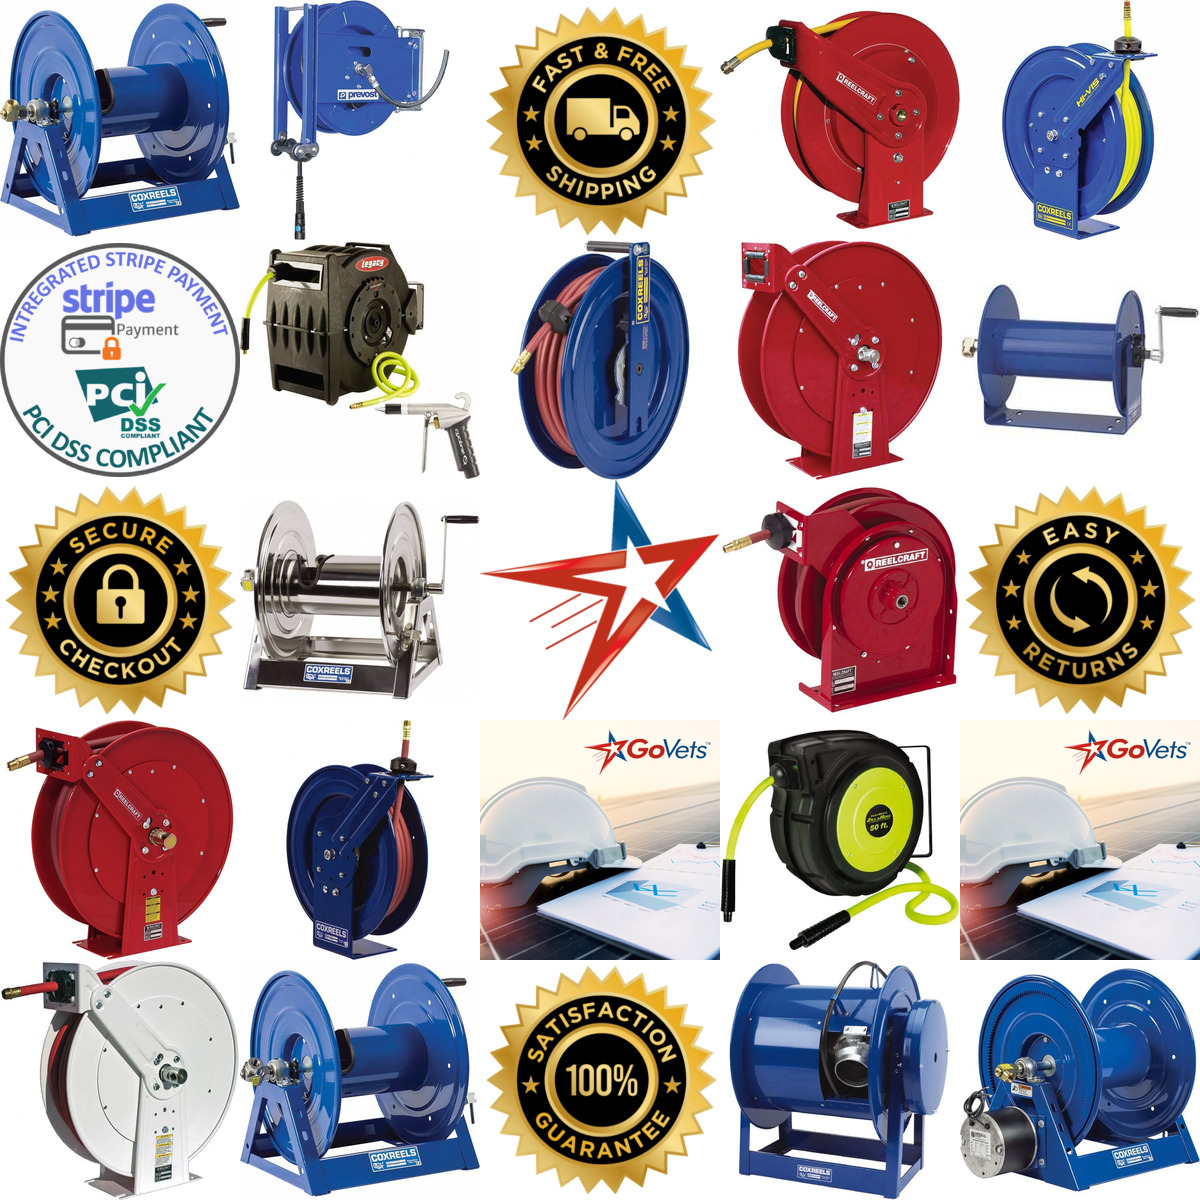 A selection of Hose Reels products on GoVets